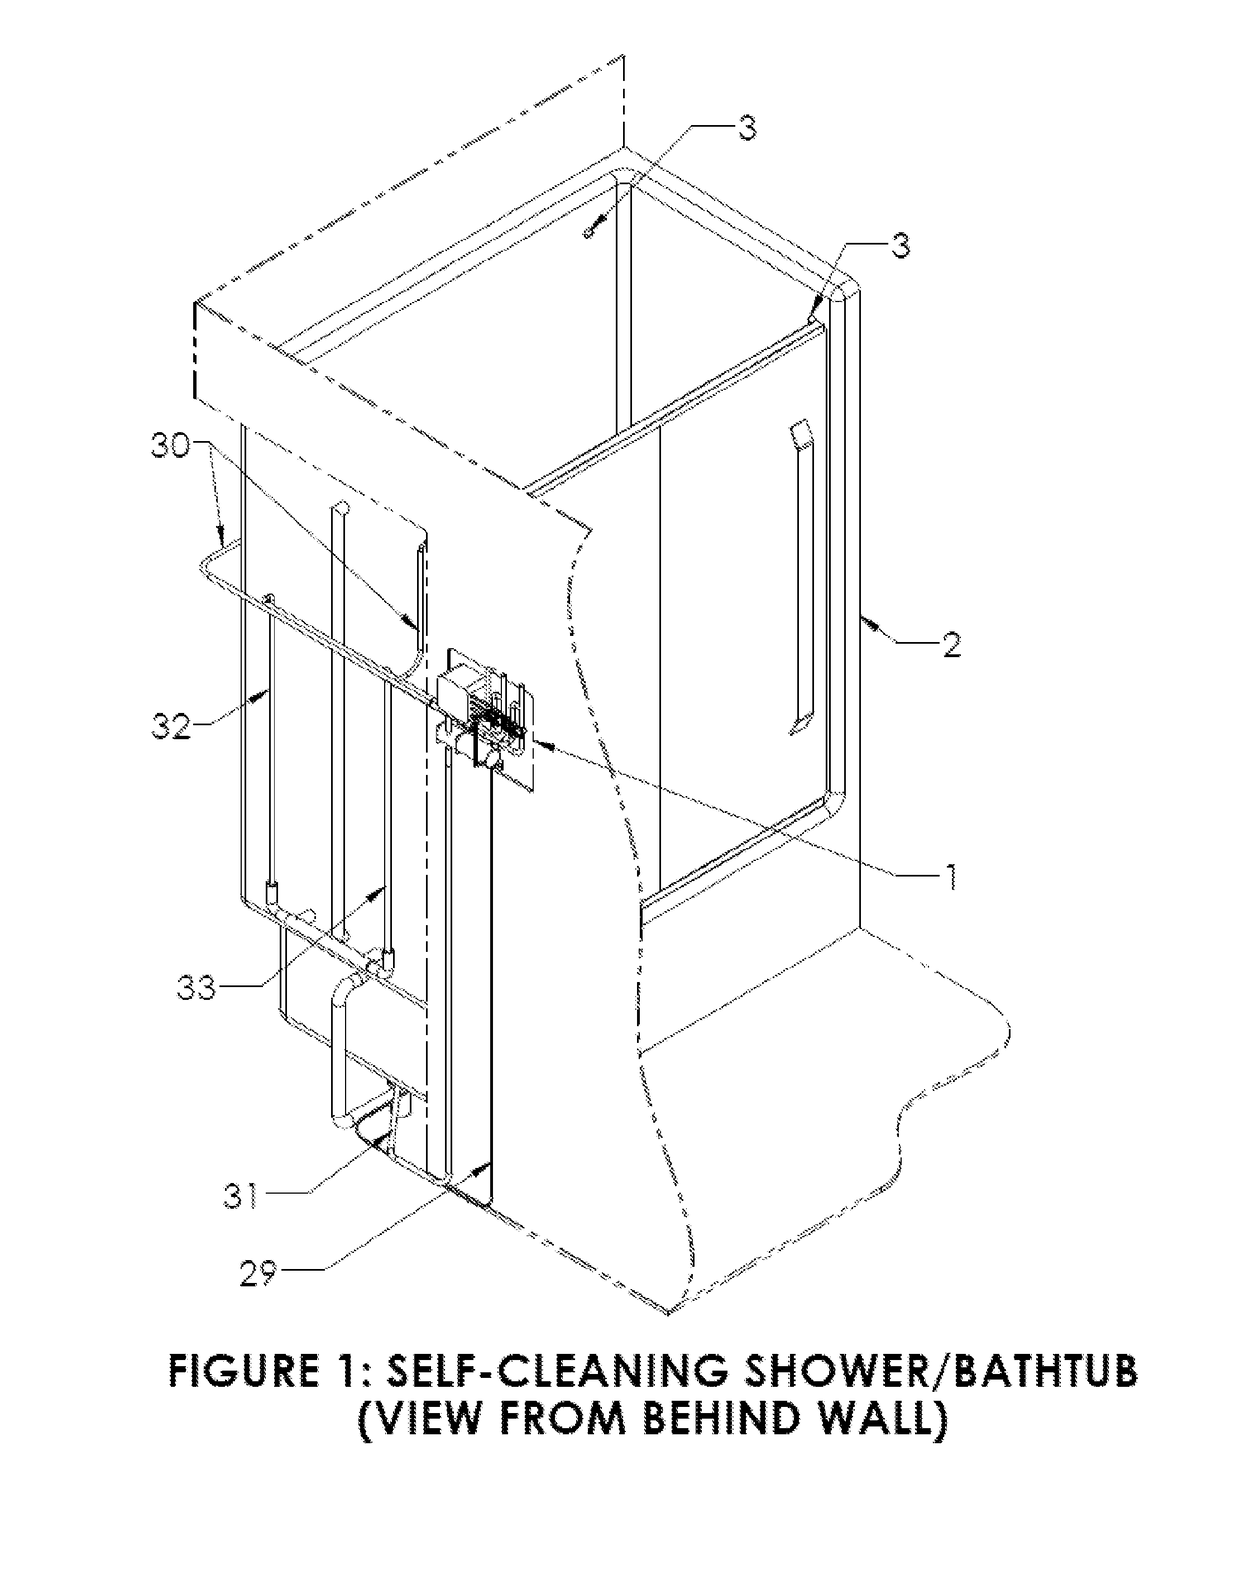 Devices to automate process for cleaning showers and bathtubs